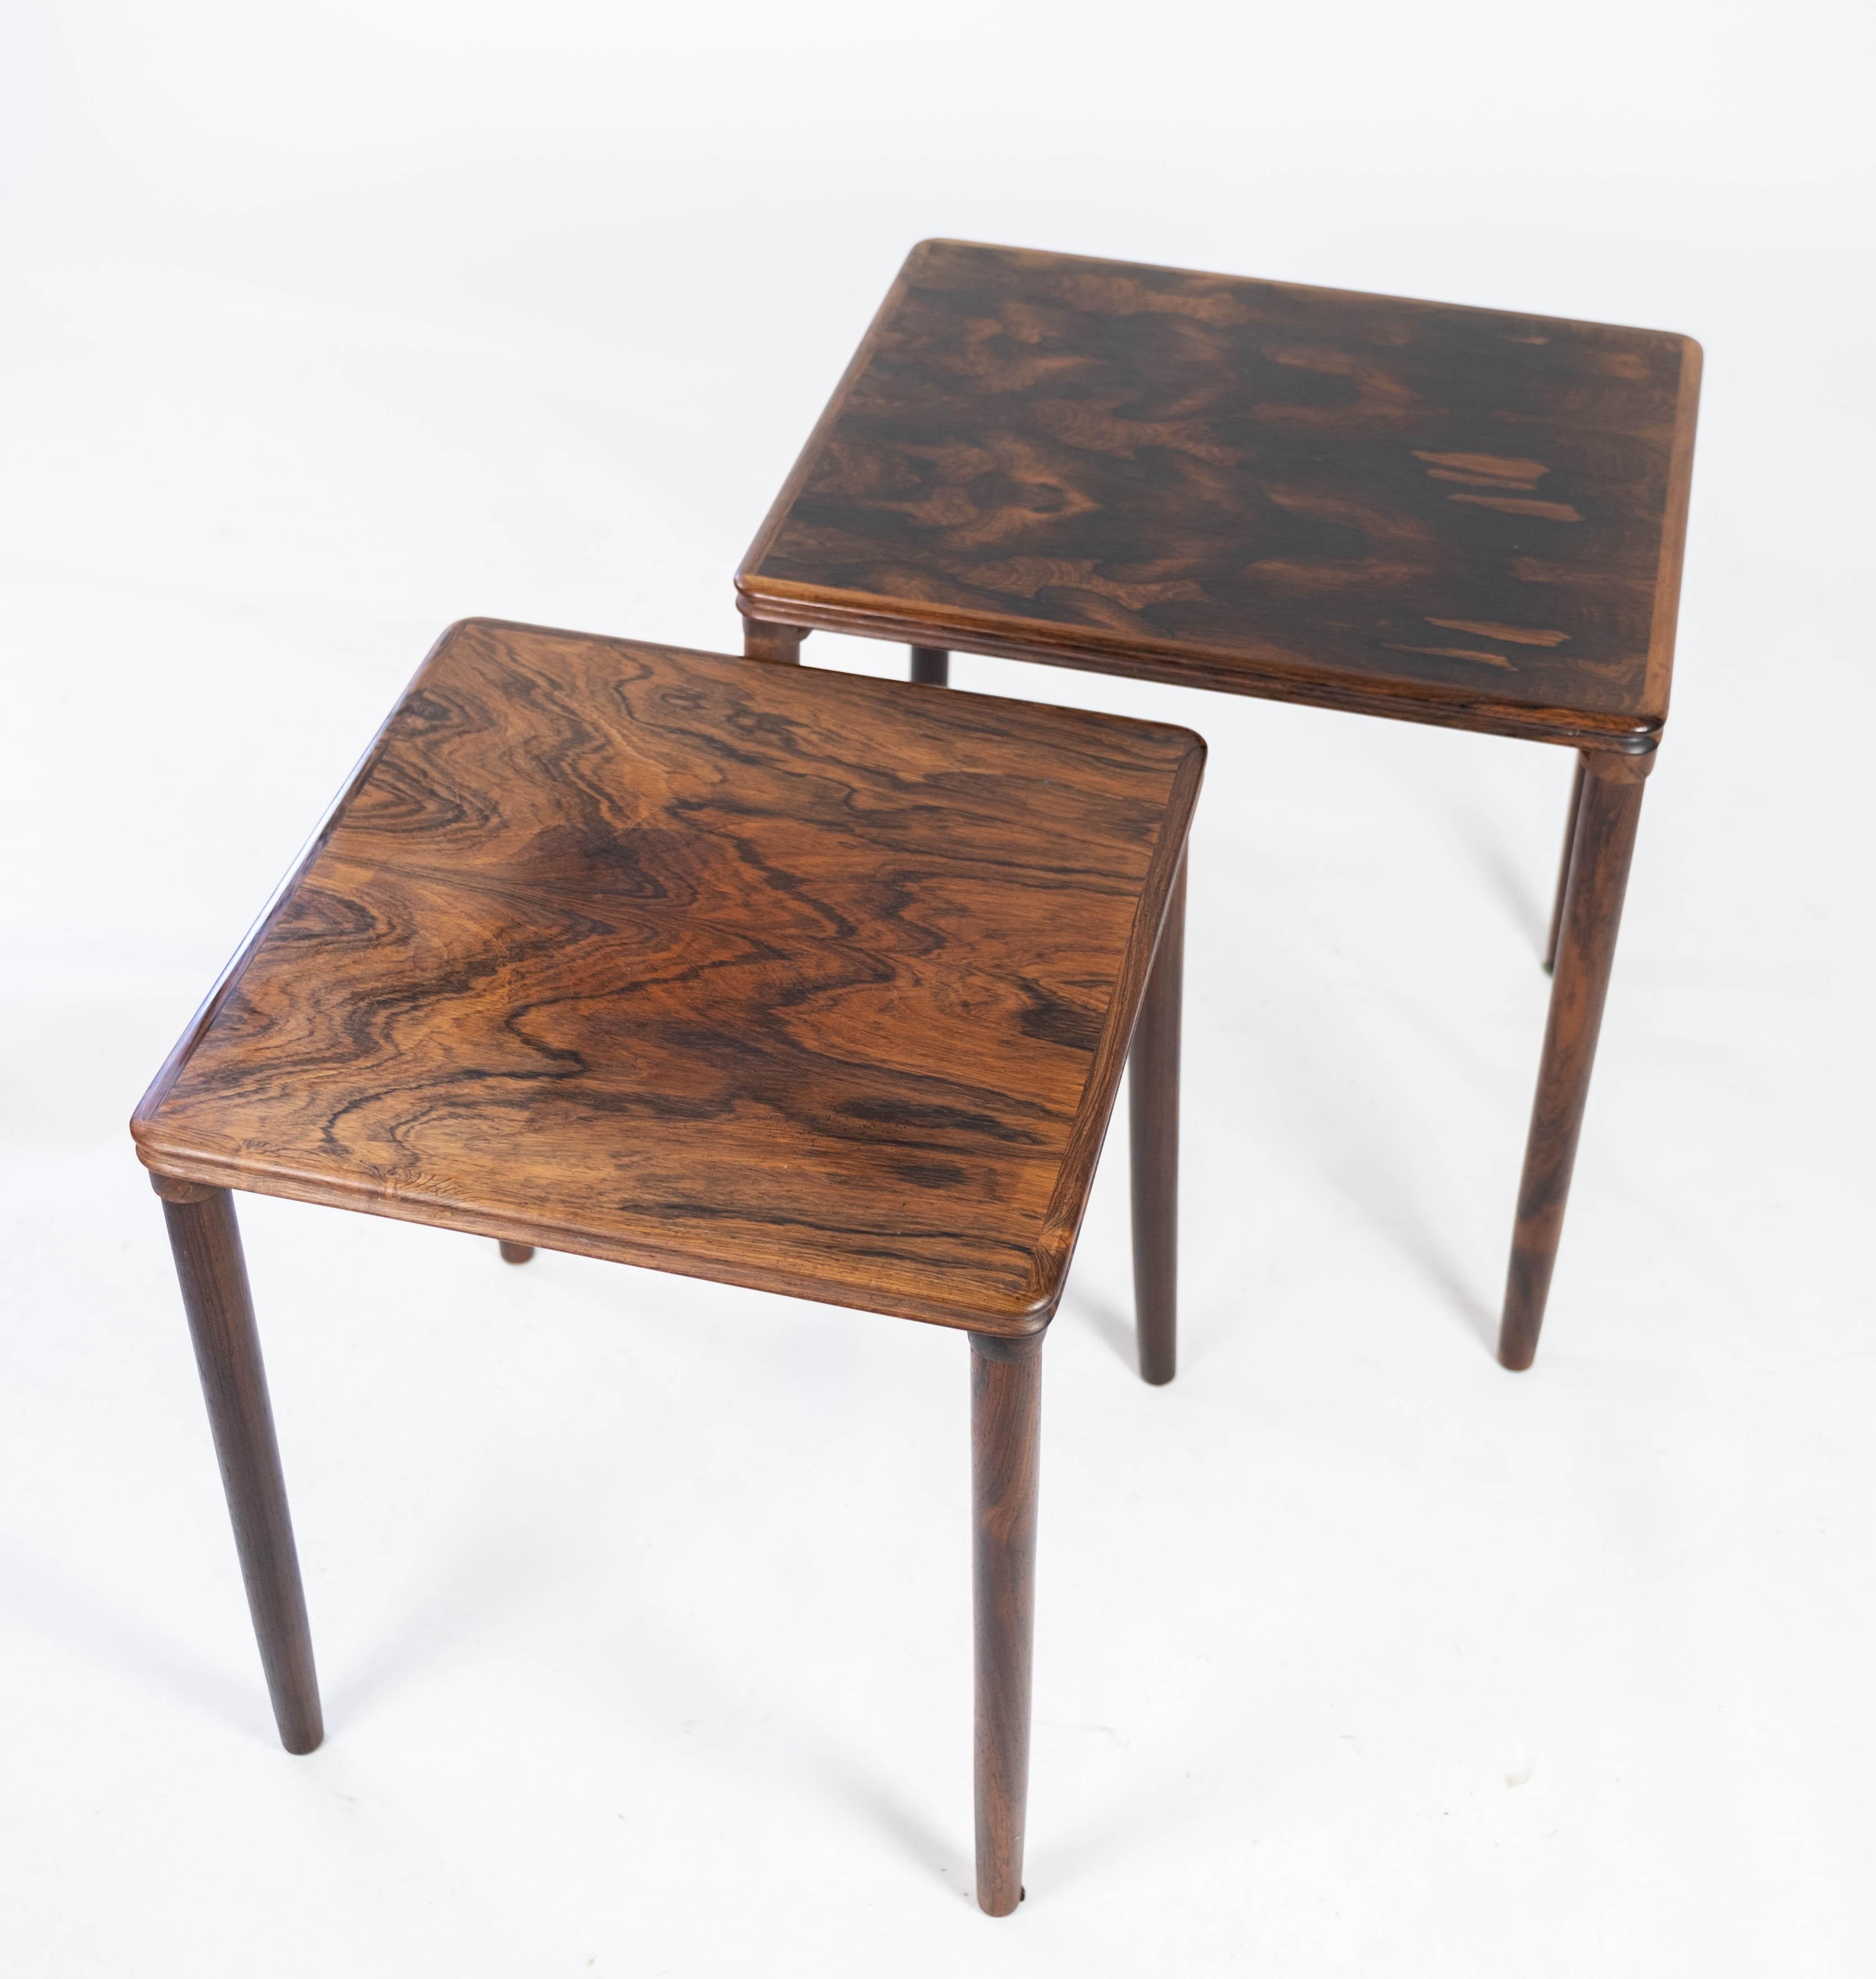 Nesting Tables in Rosewood of Danish Design from the 1960s For Sale 4